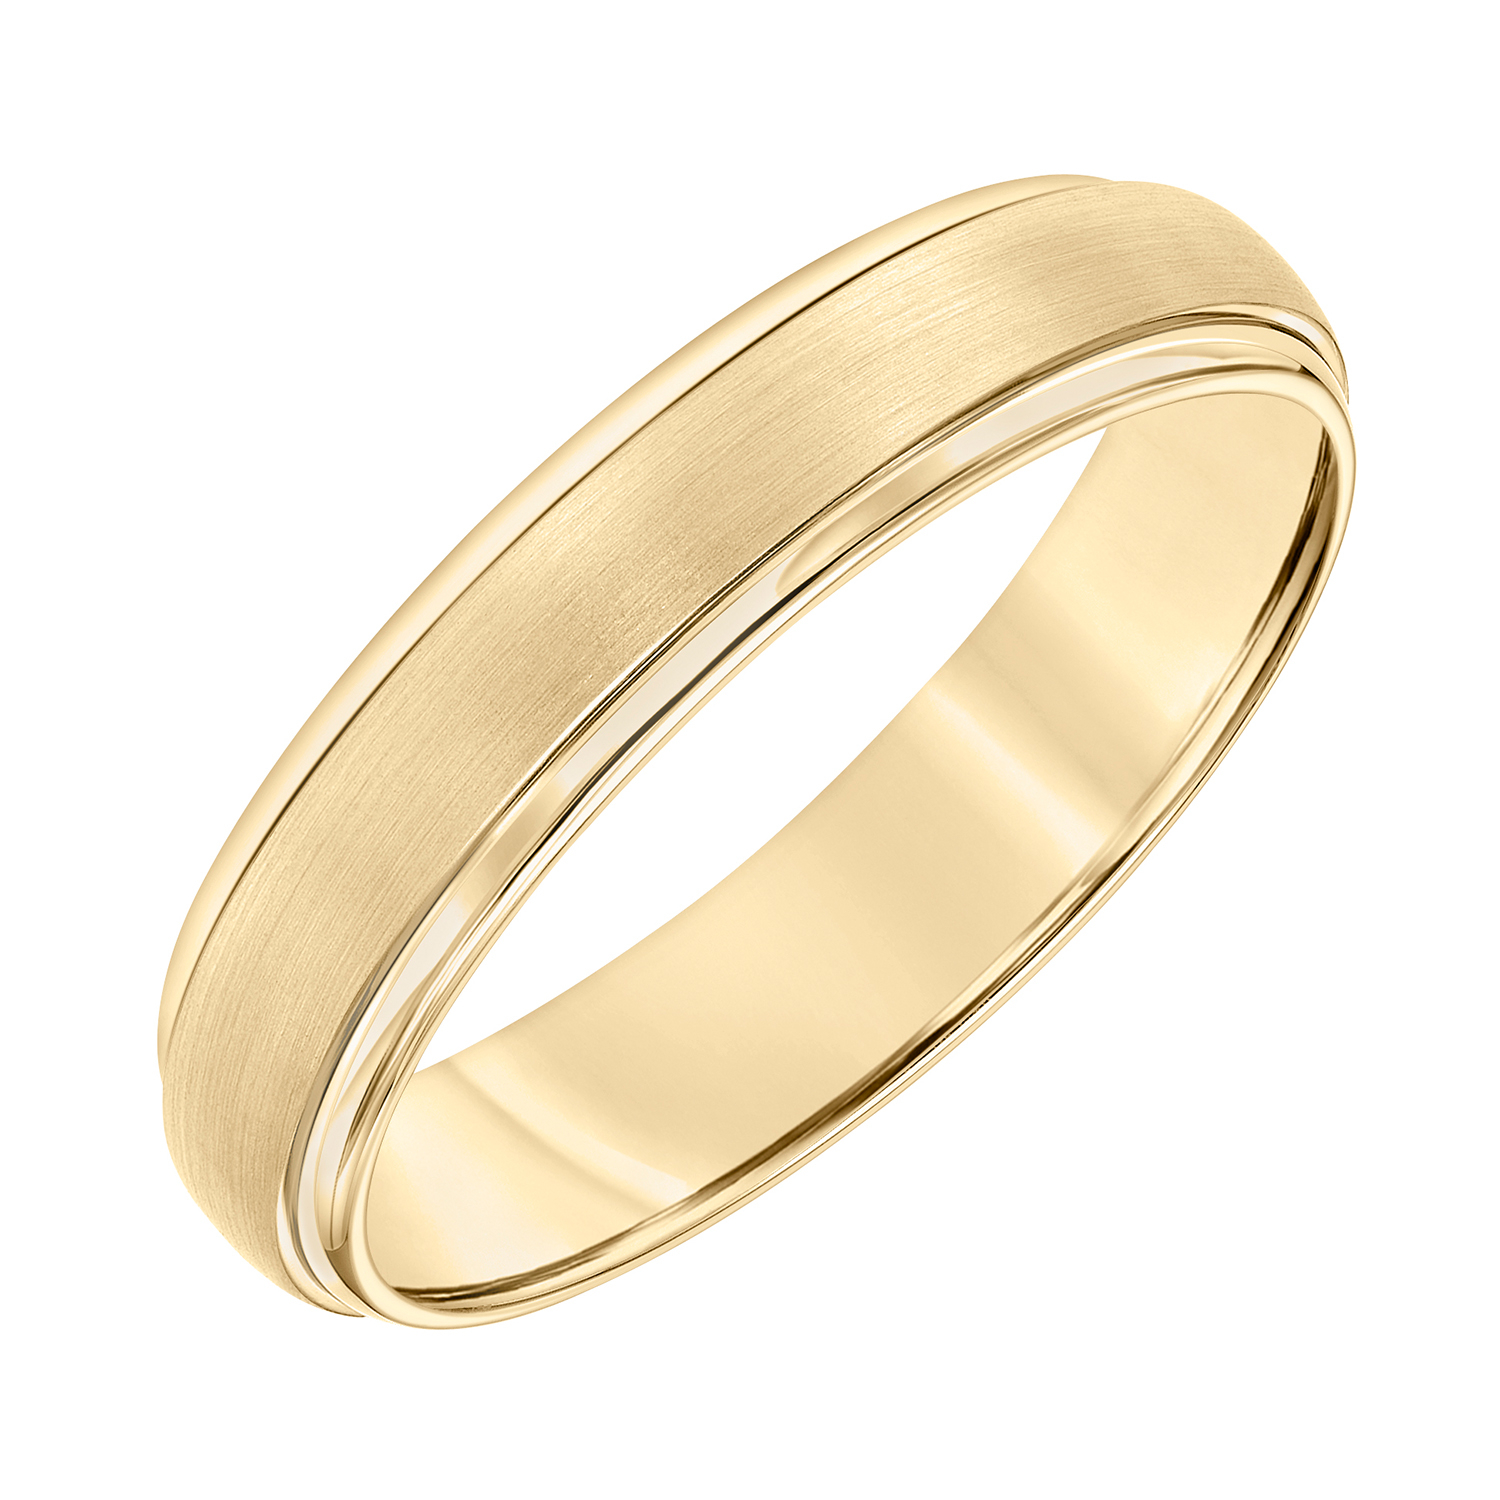 The Rough Edge Band 14K Yellow Gold